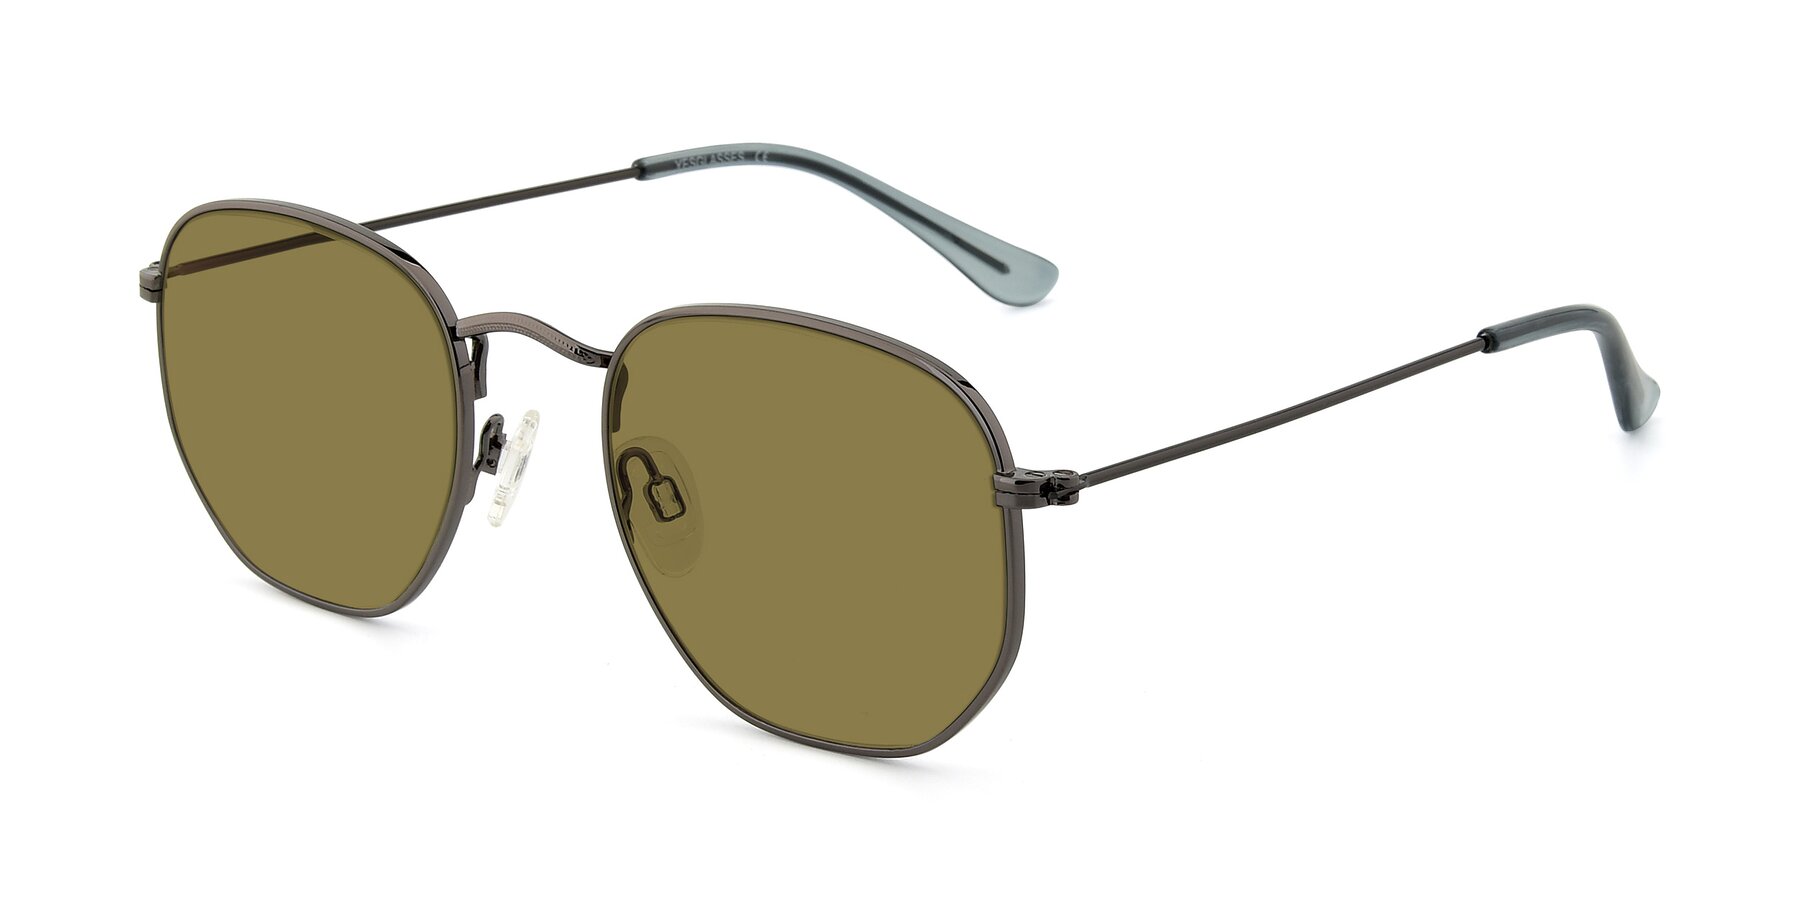 Angle of SSR1944 in Grey with Brown Polarized Lenses